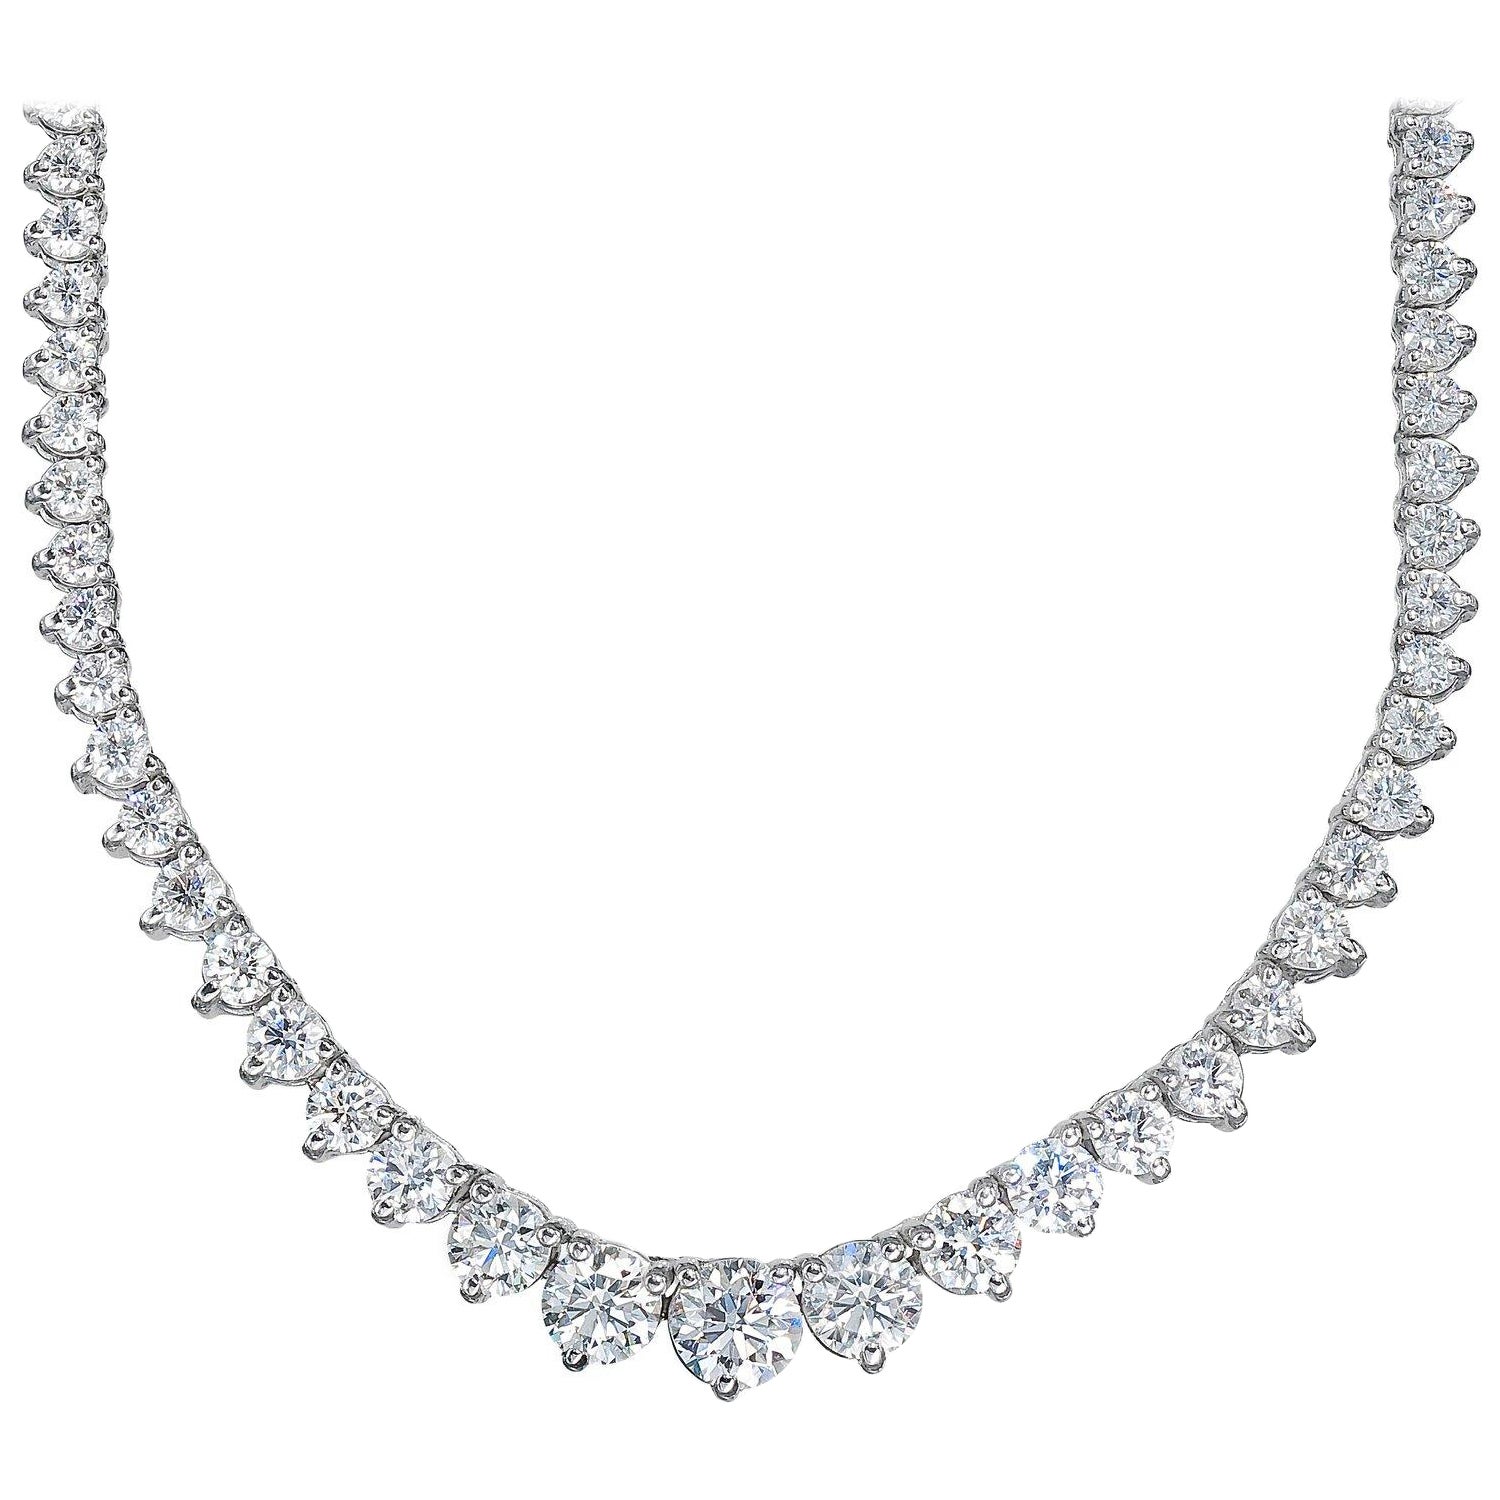 Graduated Riviera Tennis Necklace (25 ct EF VVS GIA Diamonds) in White Gold For Sale